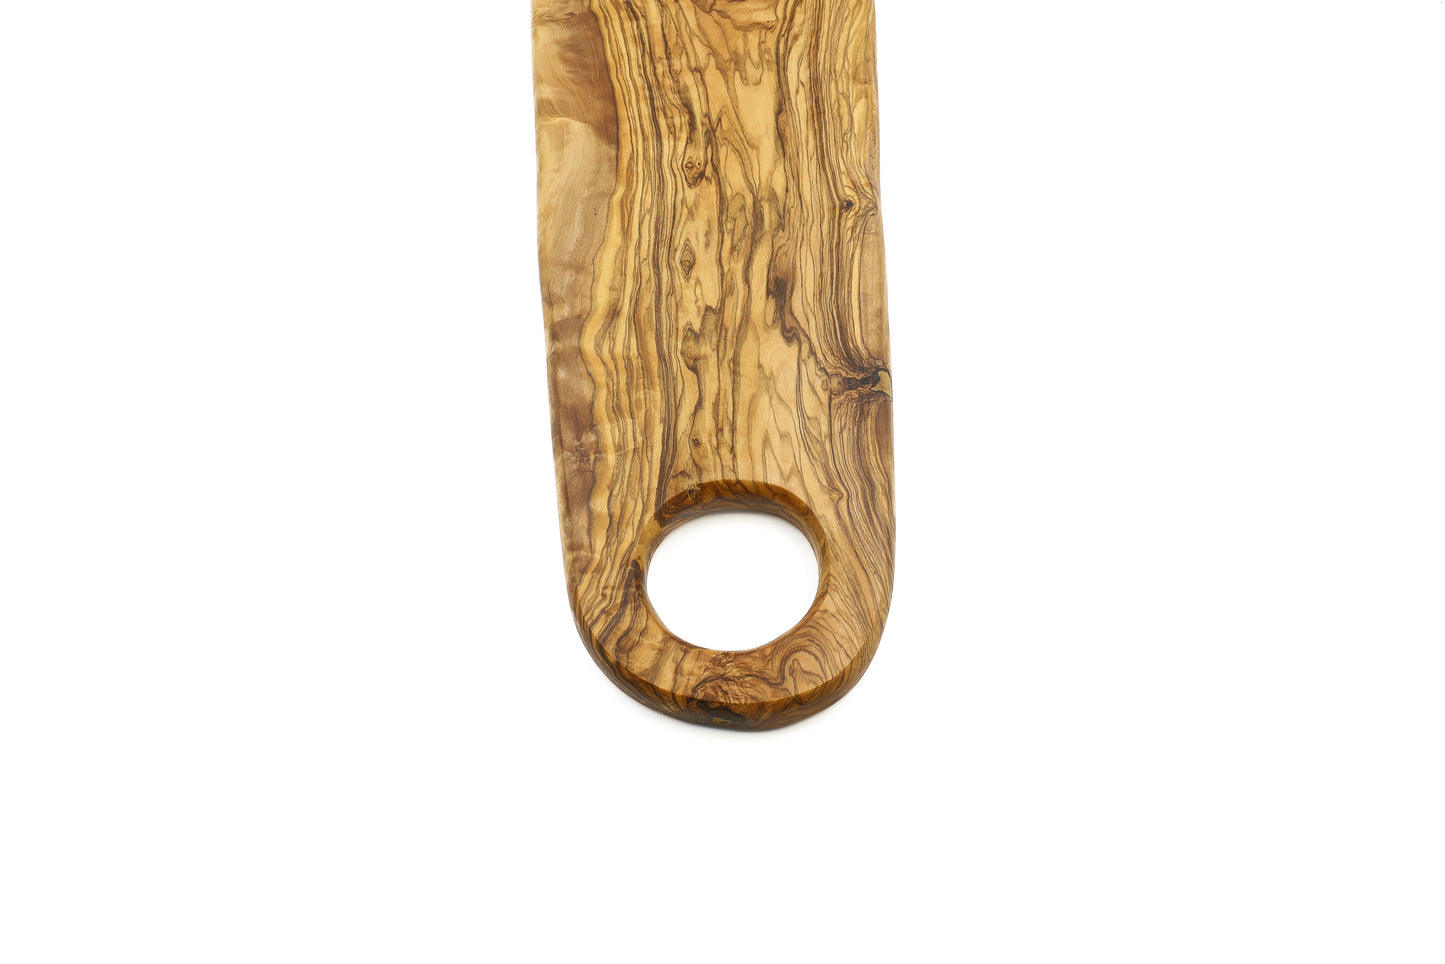 Elegant oval olive wood display board, showcasing your items fashionably